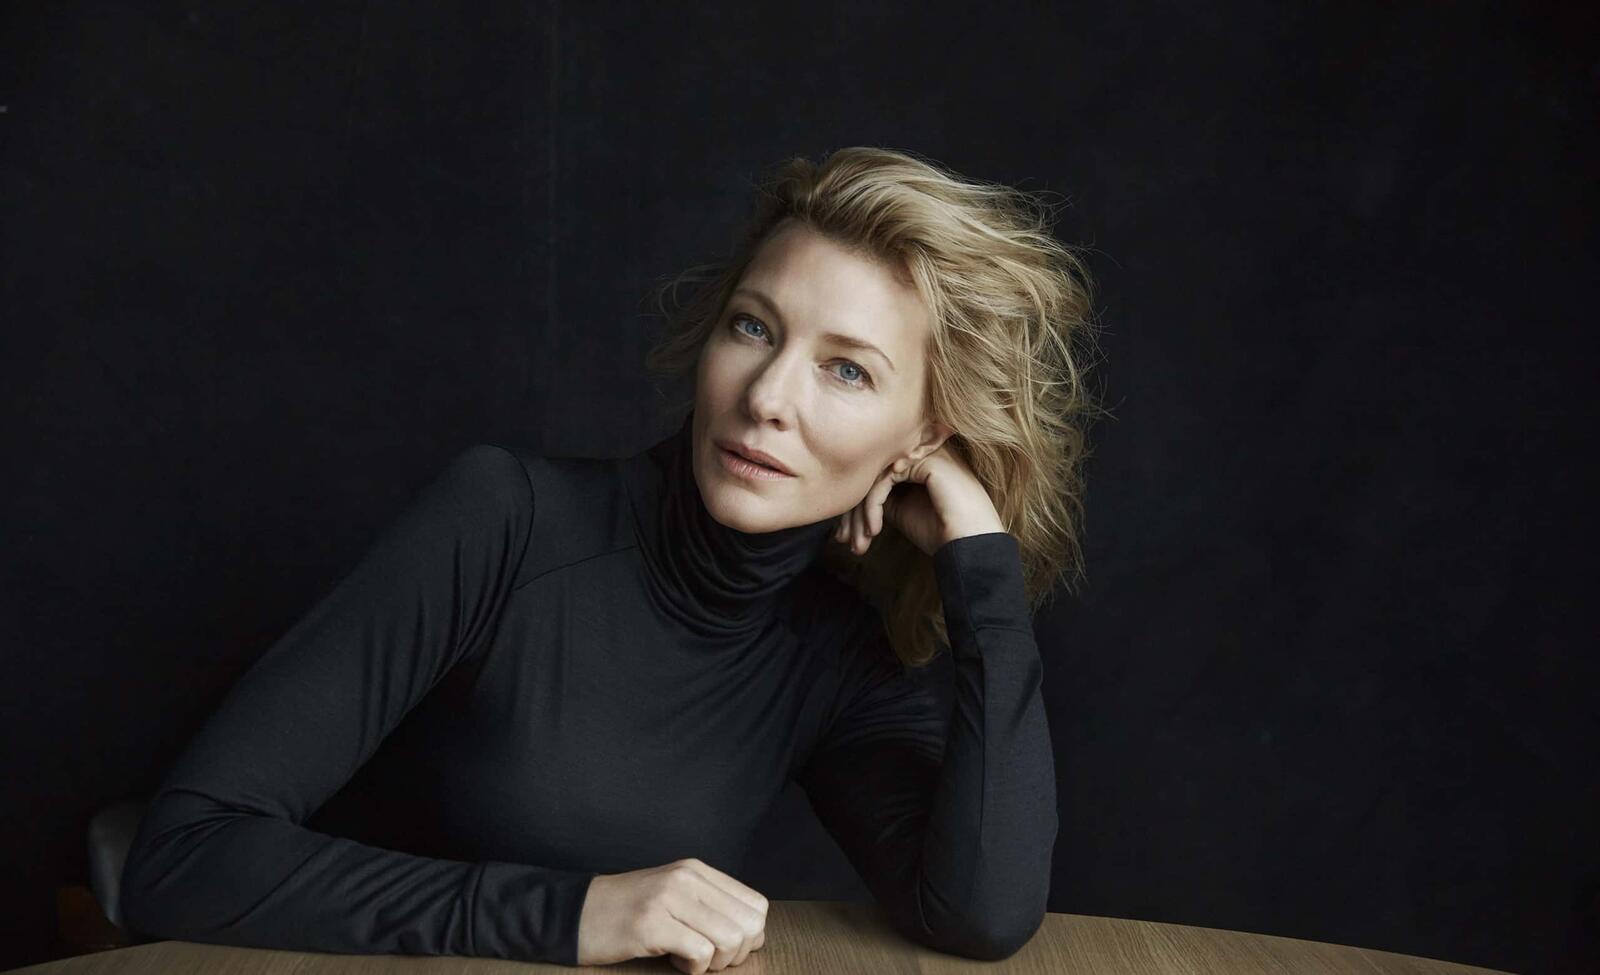 Wallpapers Cate Blanchett in black sweater background on the desktop